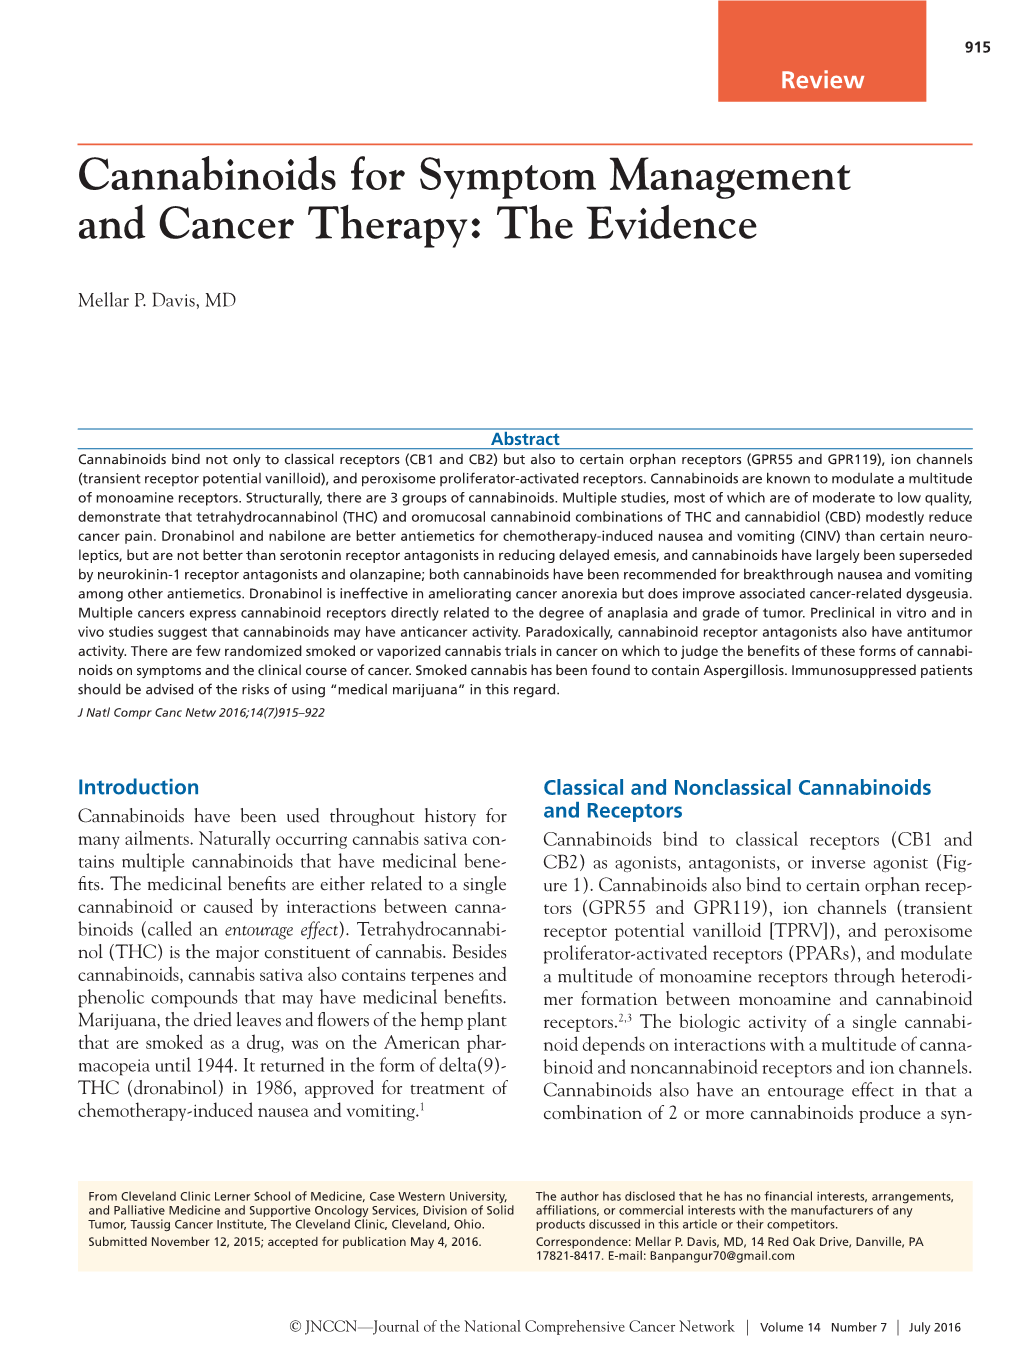 Cannabinoids for Symptom Management and Cancer Therapy: the Evidence